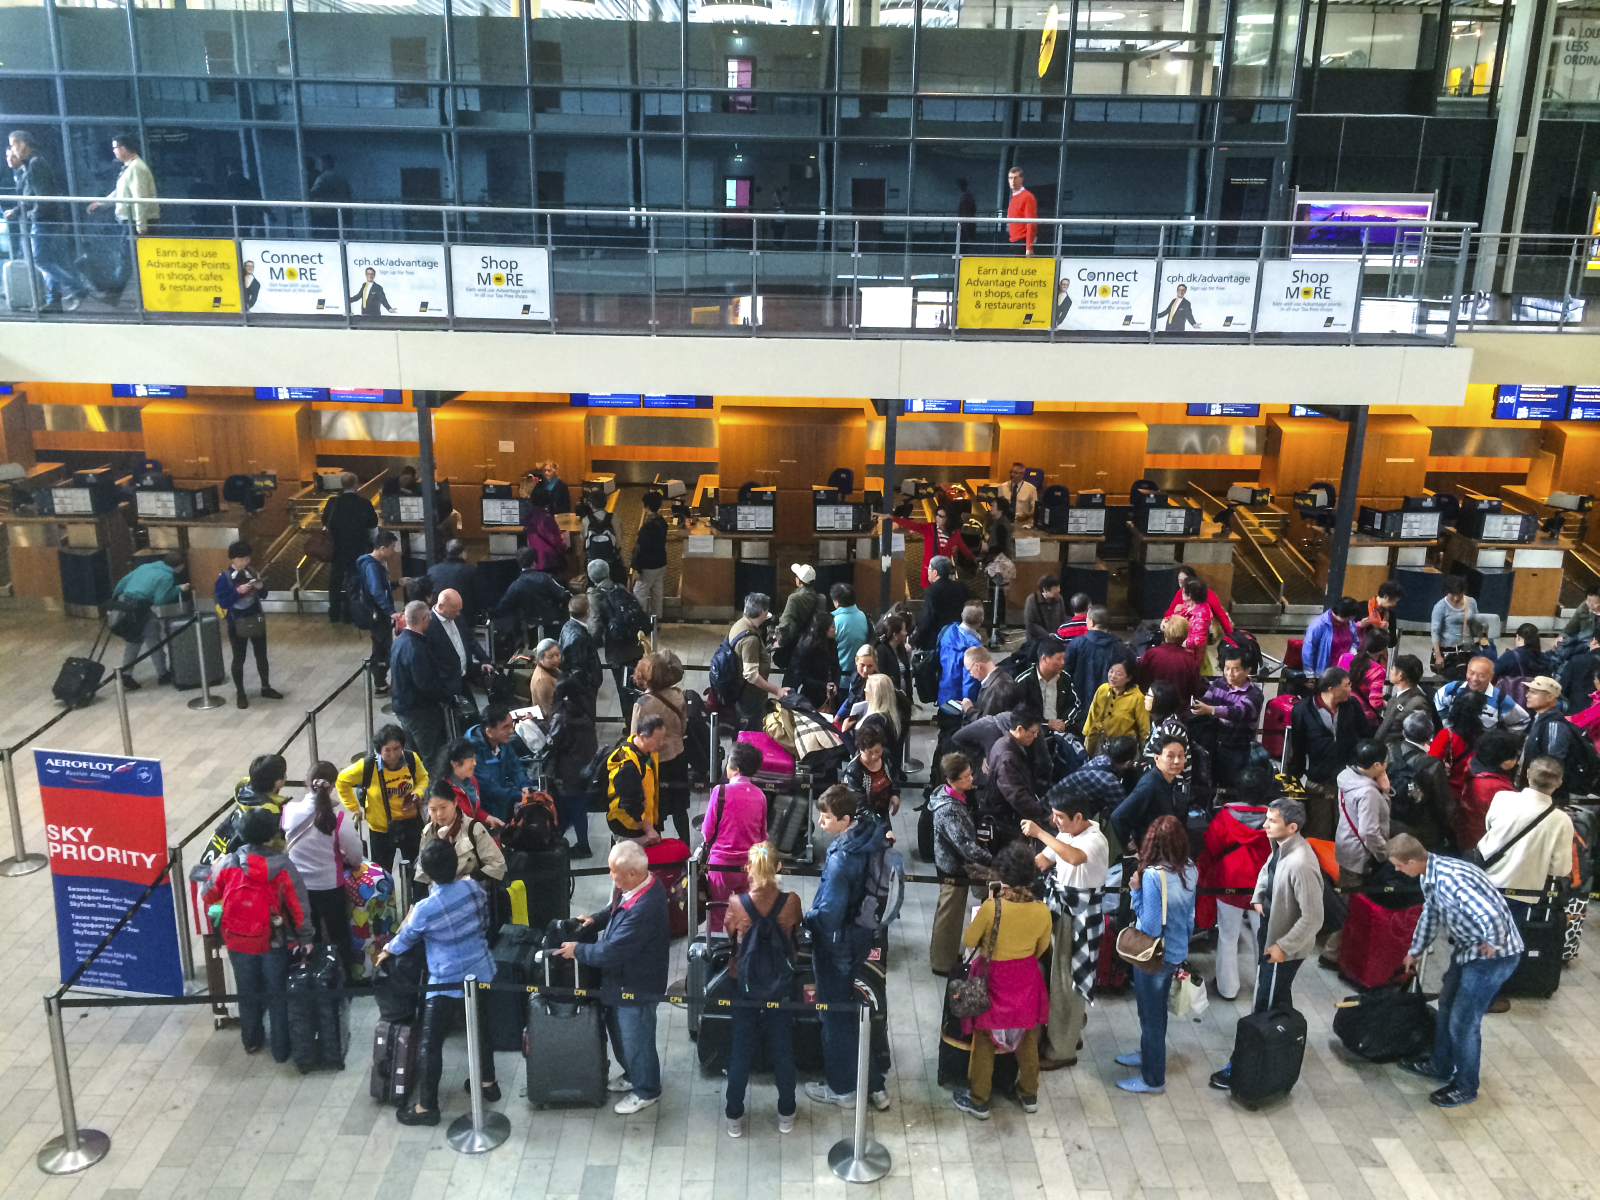 People waiting to make check-in for their flight